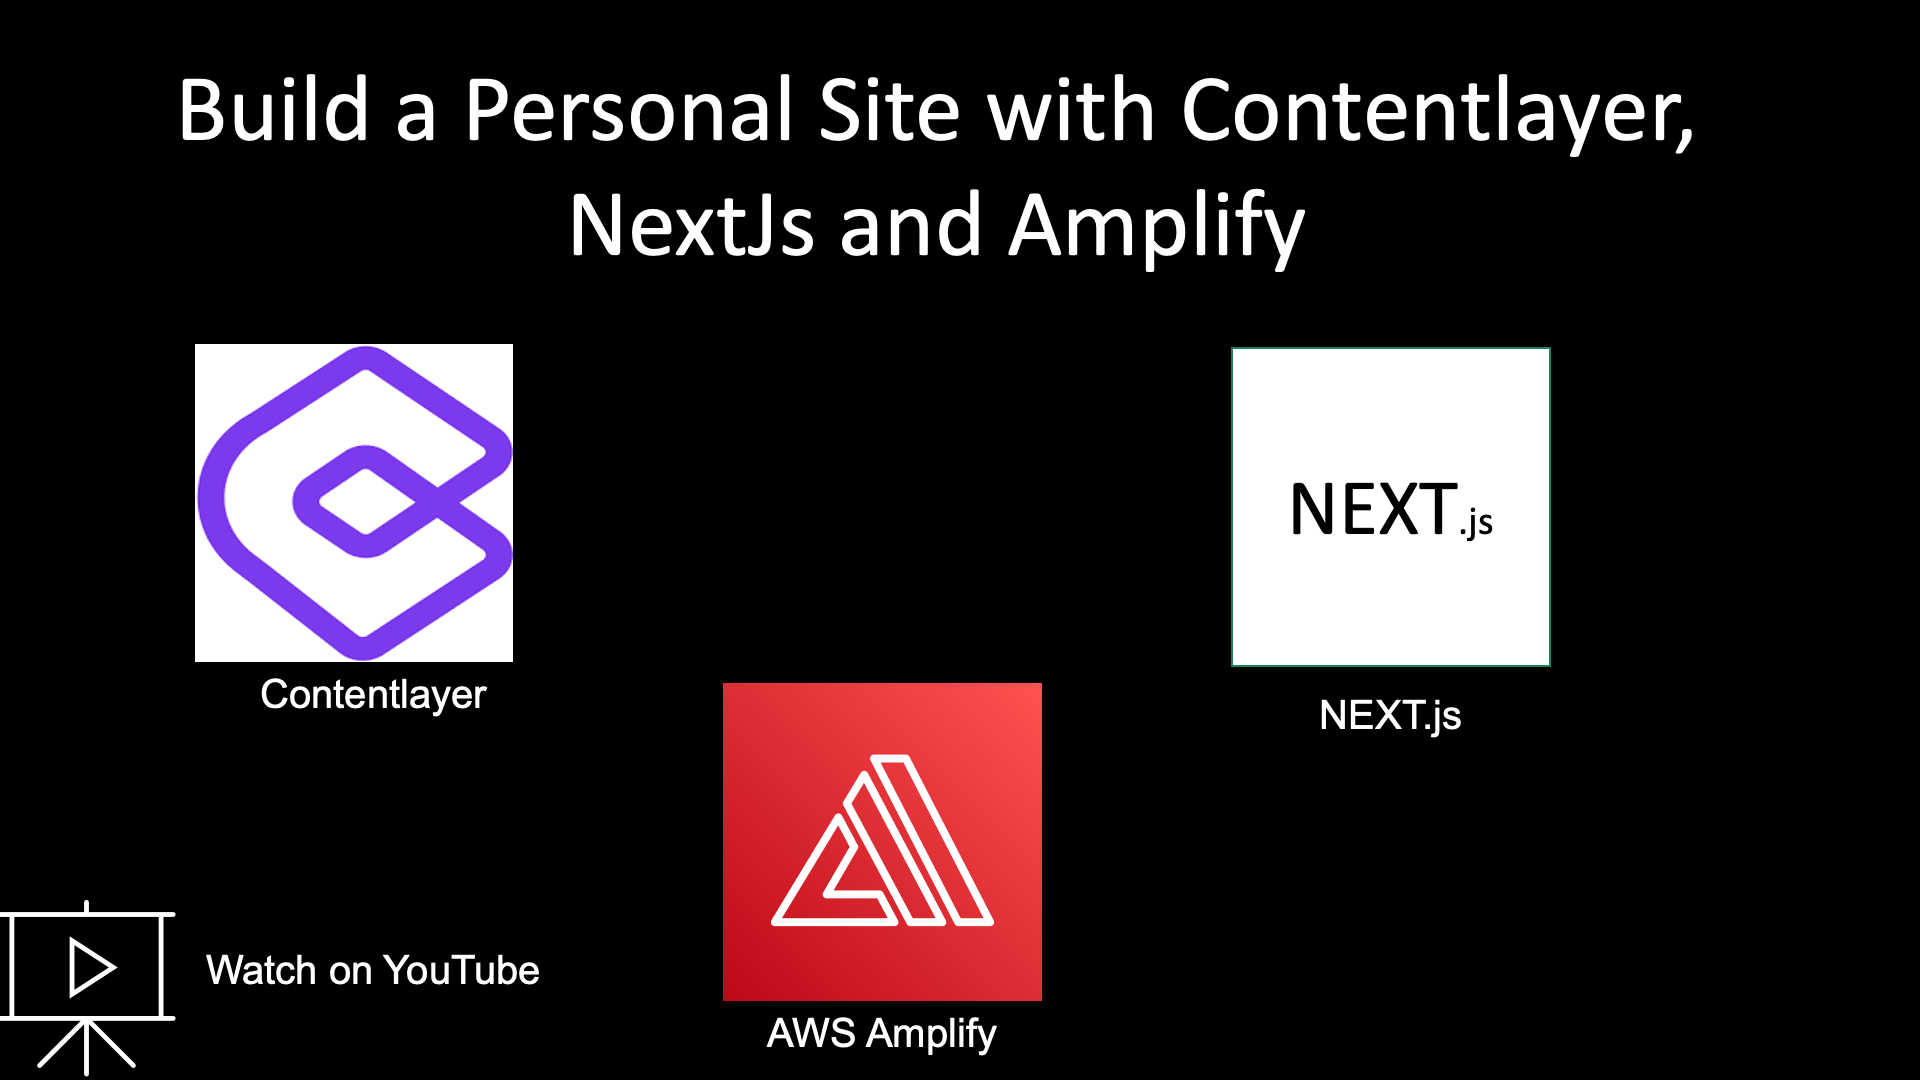 Build a Personal Site with Contentlayer, NextJs and Amplify